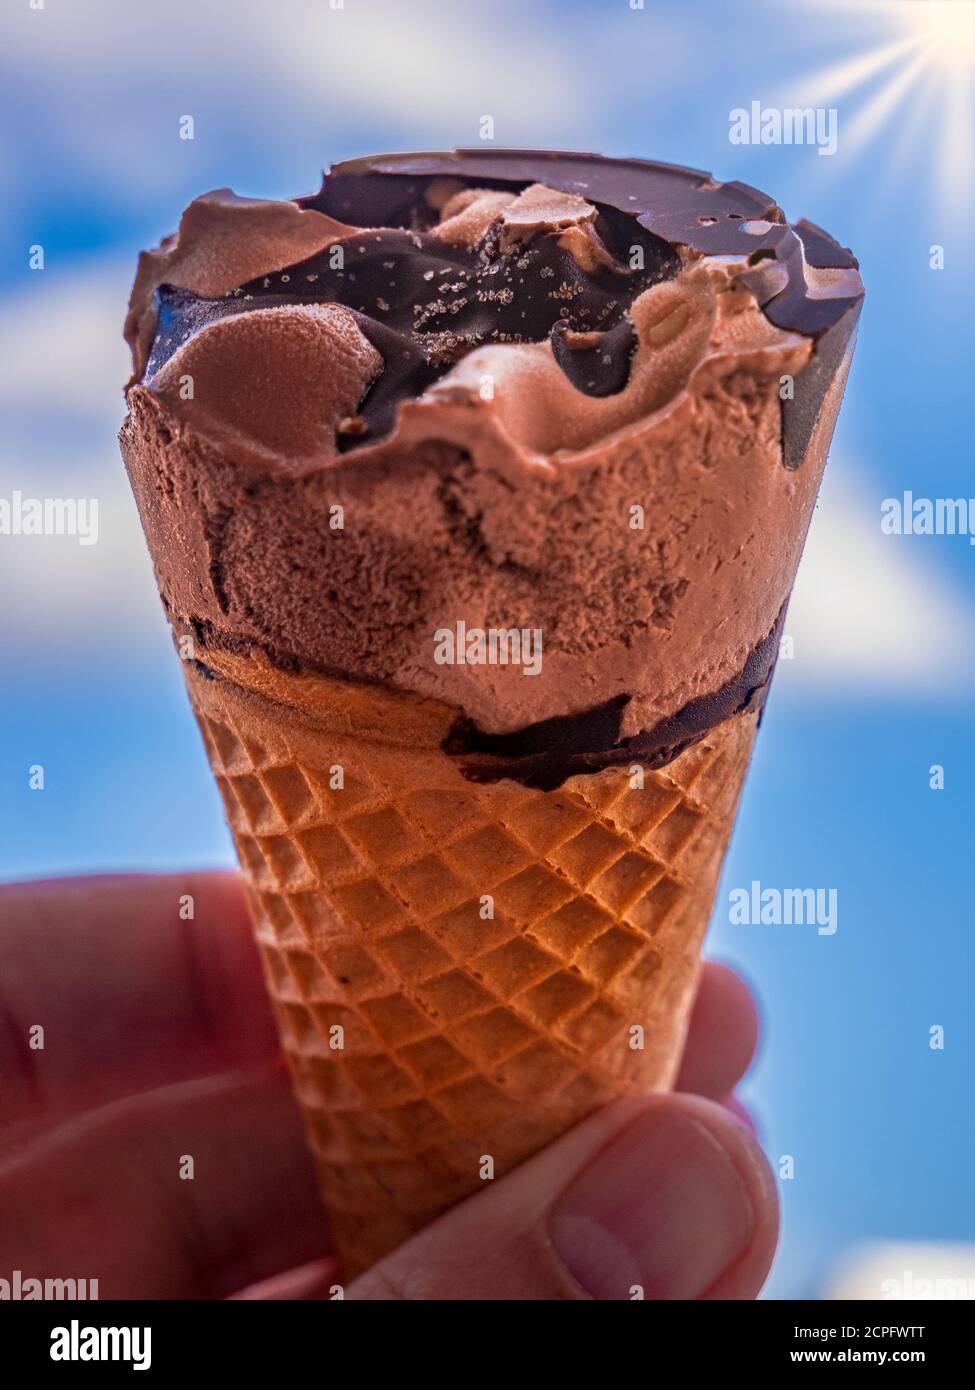 Chocolate ice cream cone held against a summer sky with clouds and sun with rays in the upper right corner Stock Photo